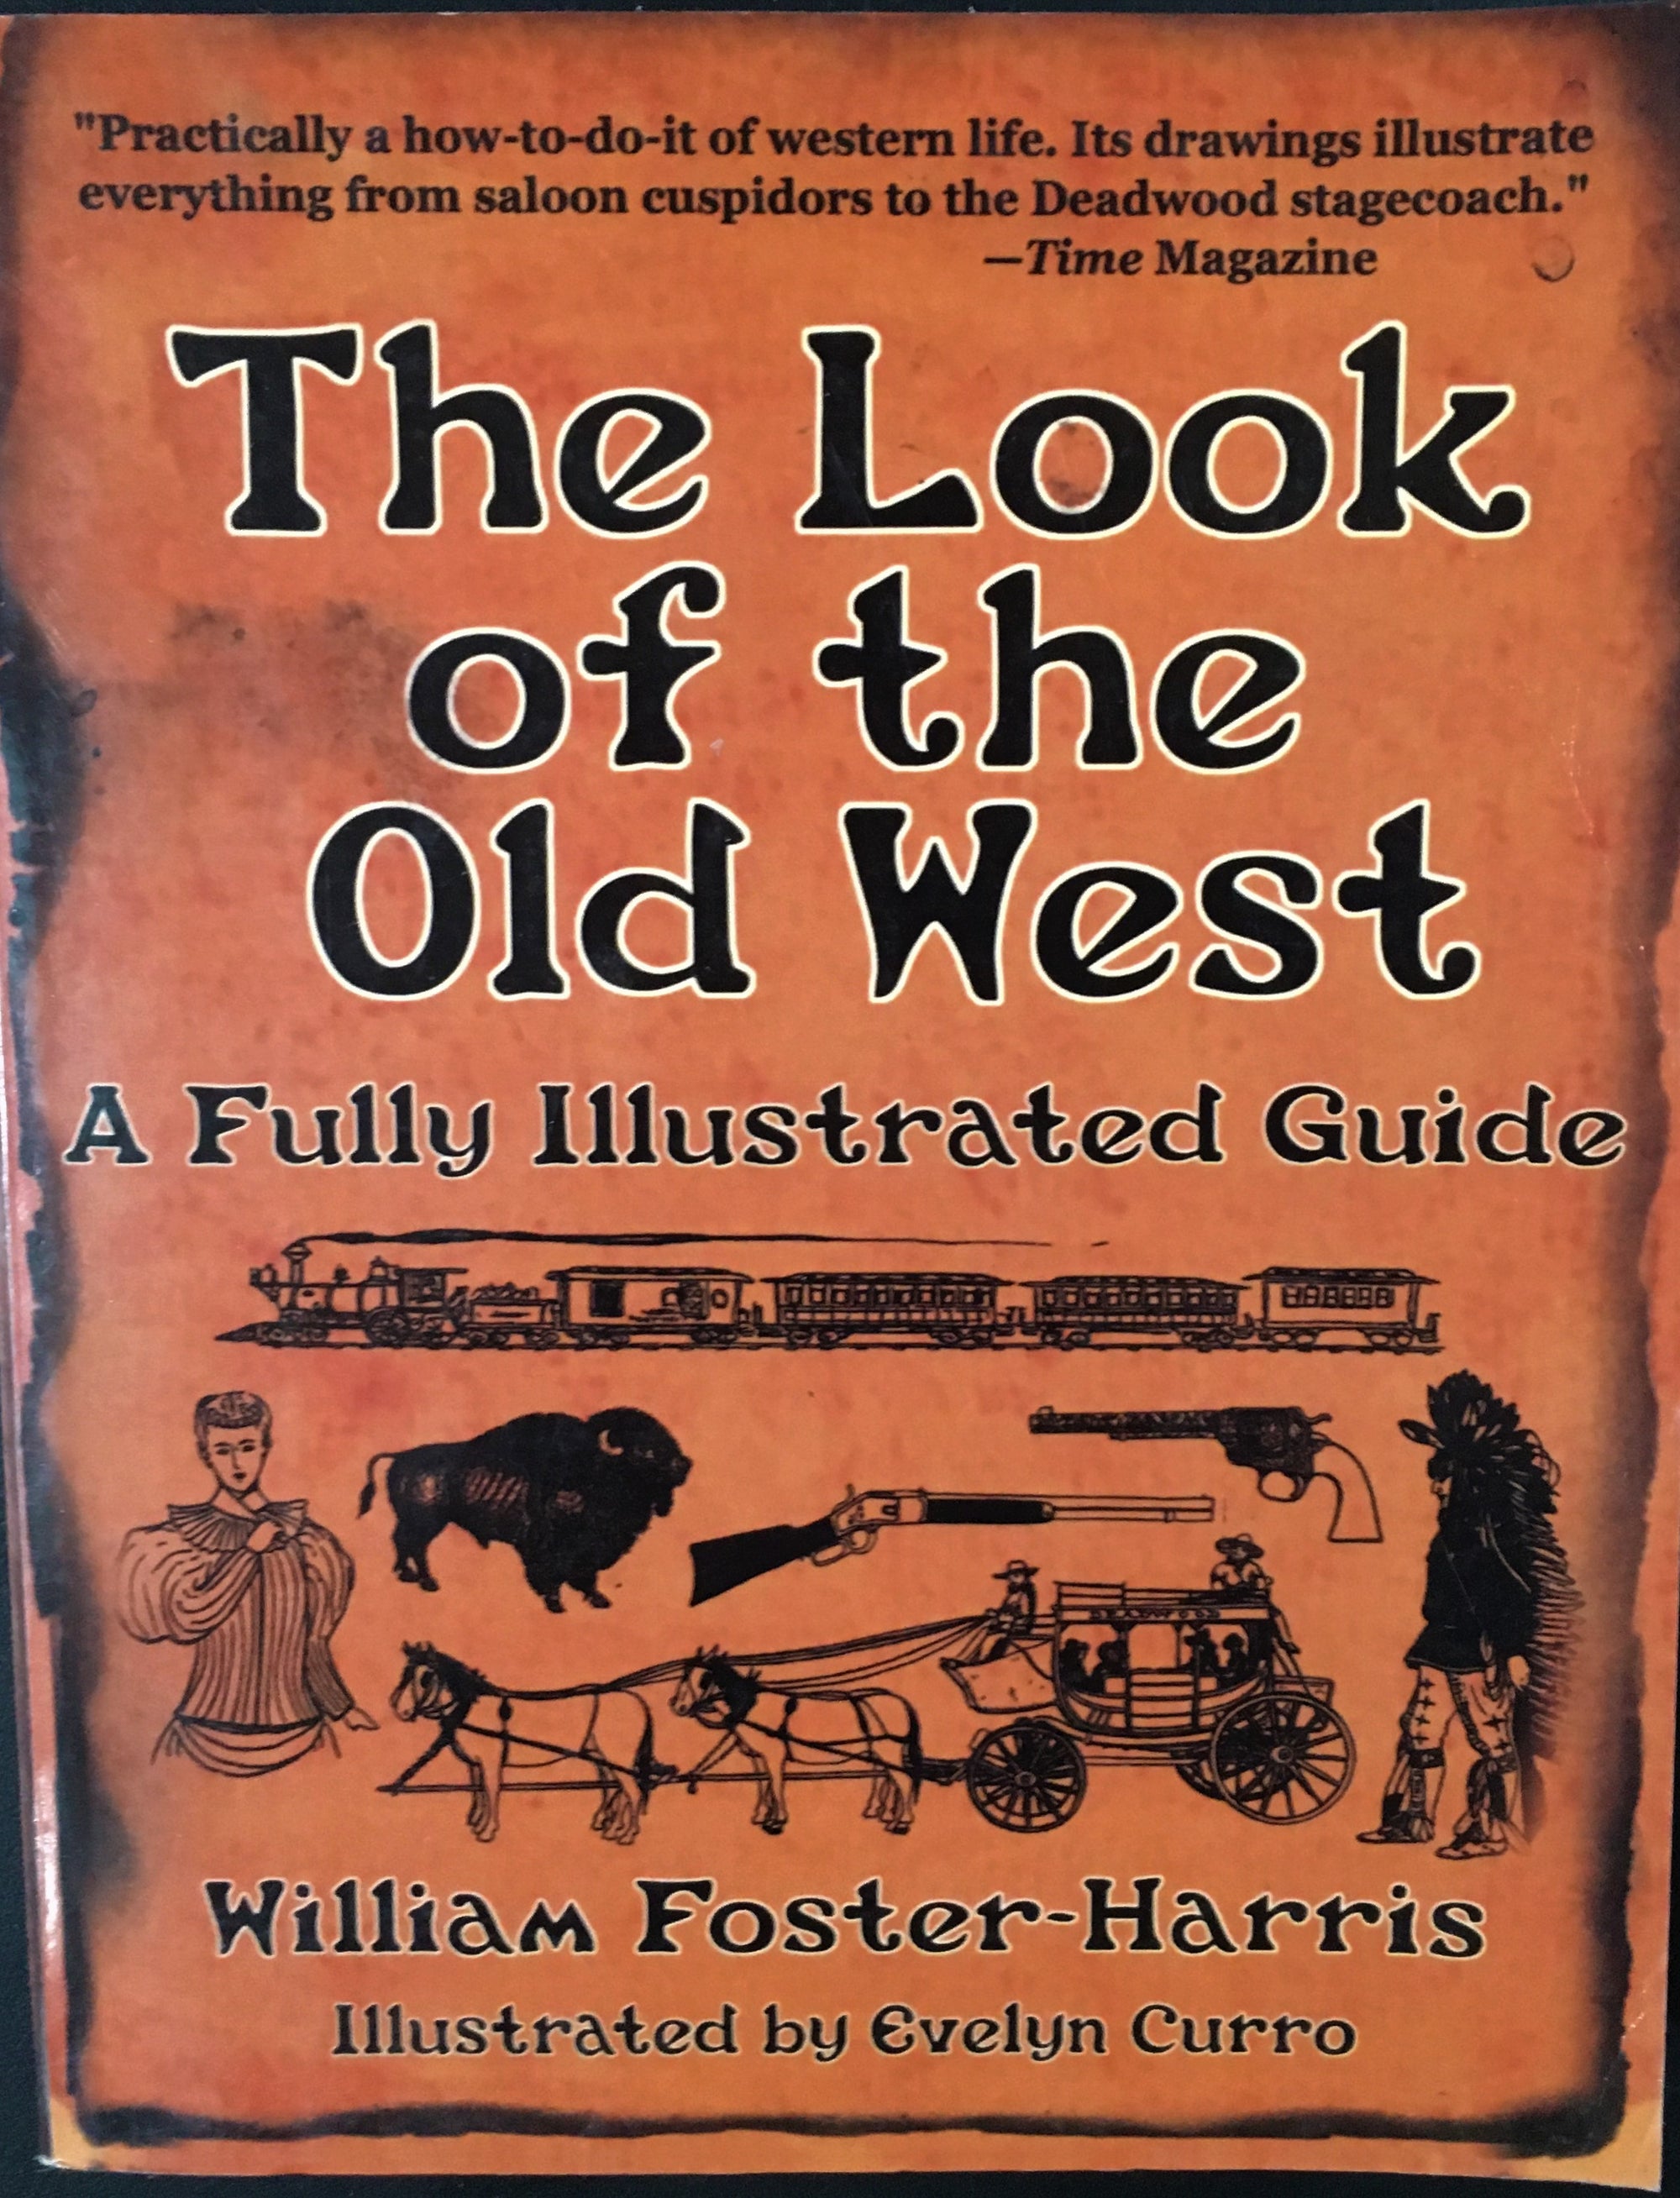 The Look of the Old West A Fully Illustrated Guide by William Foster Harris Book Cover